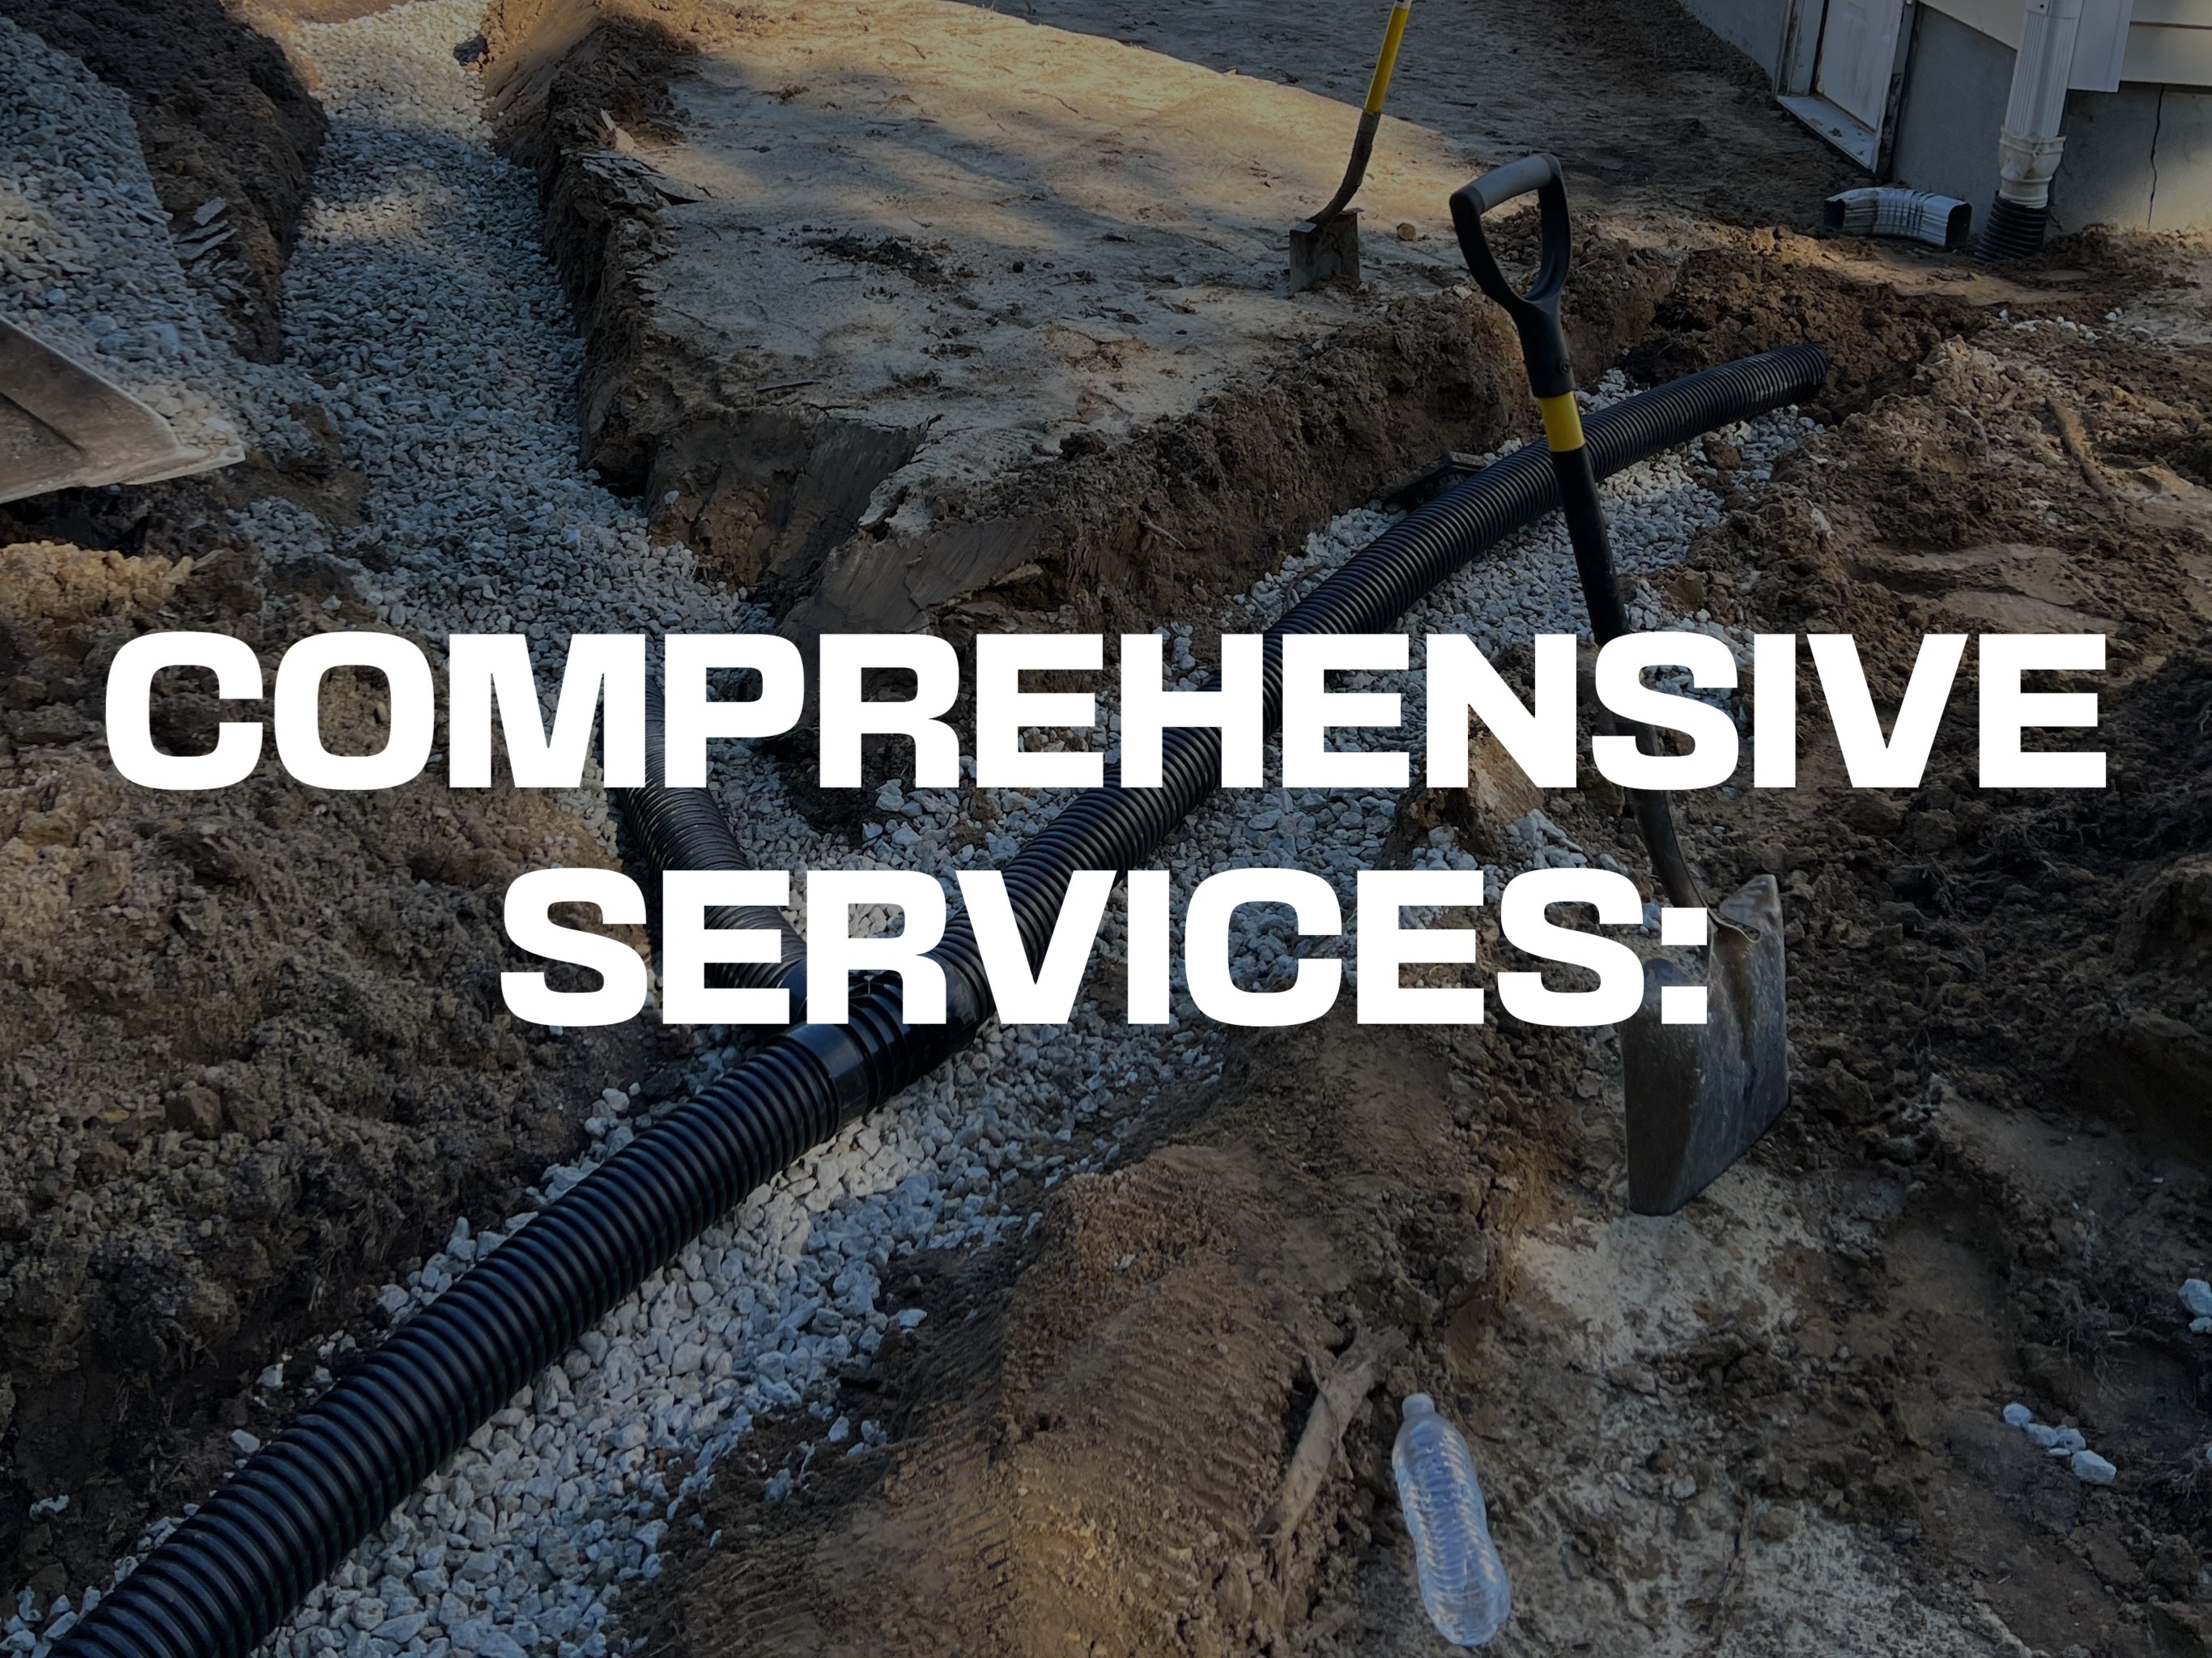 CAROLINA EARTHWERX OFFERS COMPREHENSIVE SERVICES AND CUSTOM TAILORED SOLUTIONS FOR YOUR SPECIFIC EXCAVATION, GRADING, DRAINAGE, OR LAND CLEARING PROJECT.